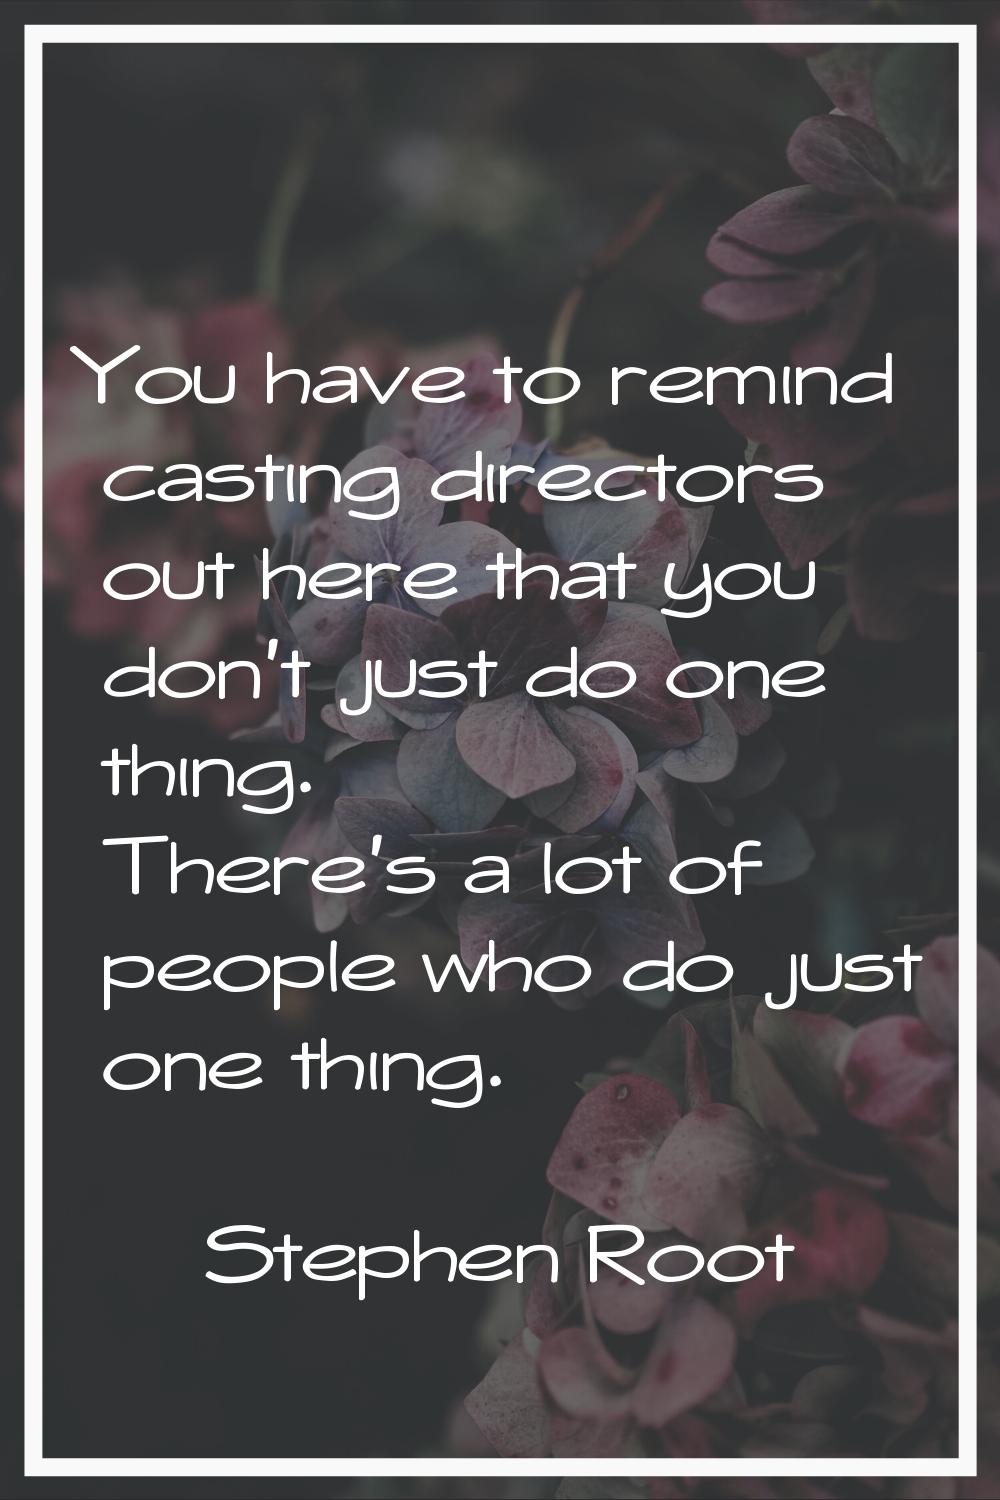 You have to remind casting directors out here that you don't just do one thing. There's a lot of pe